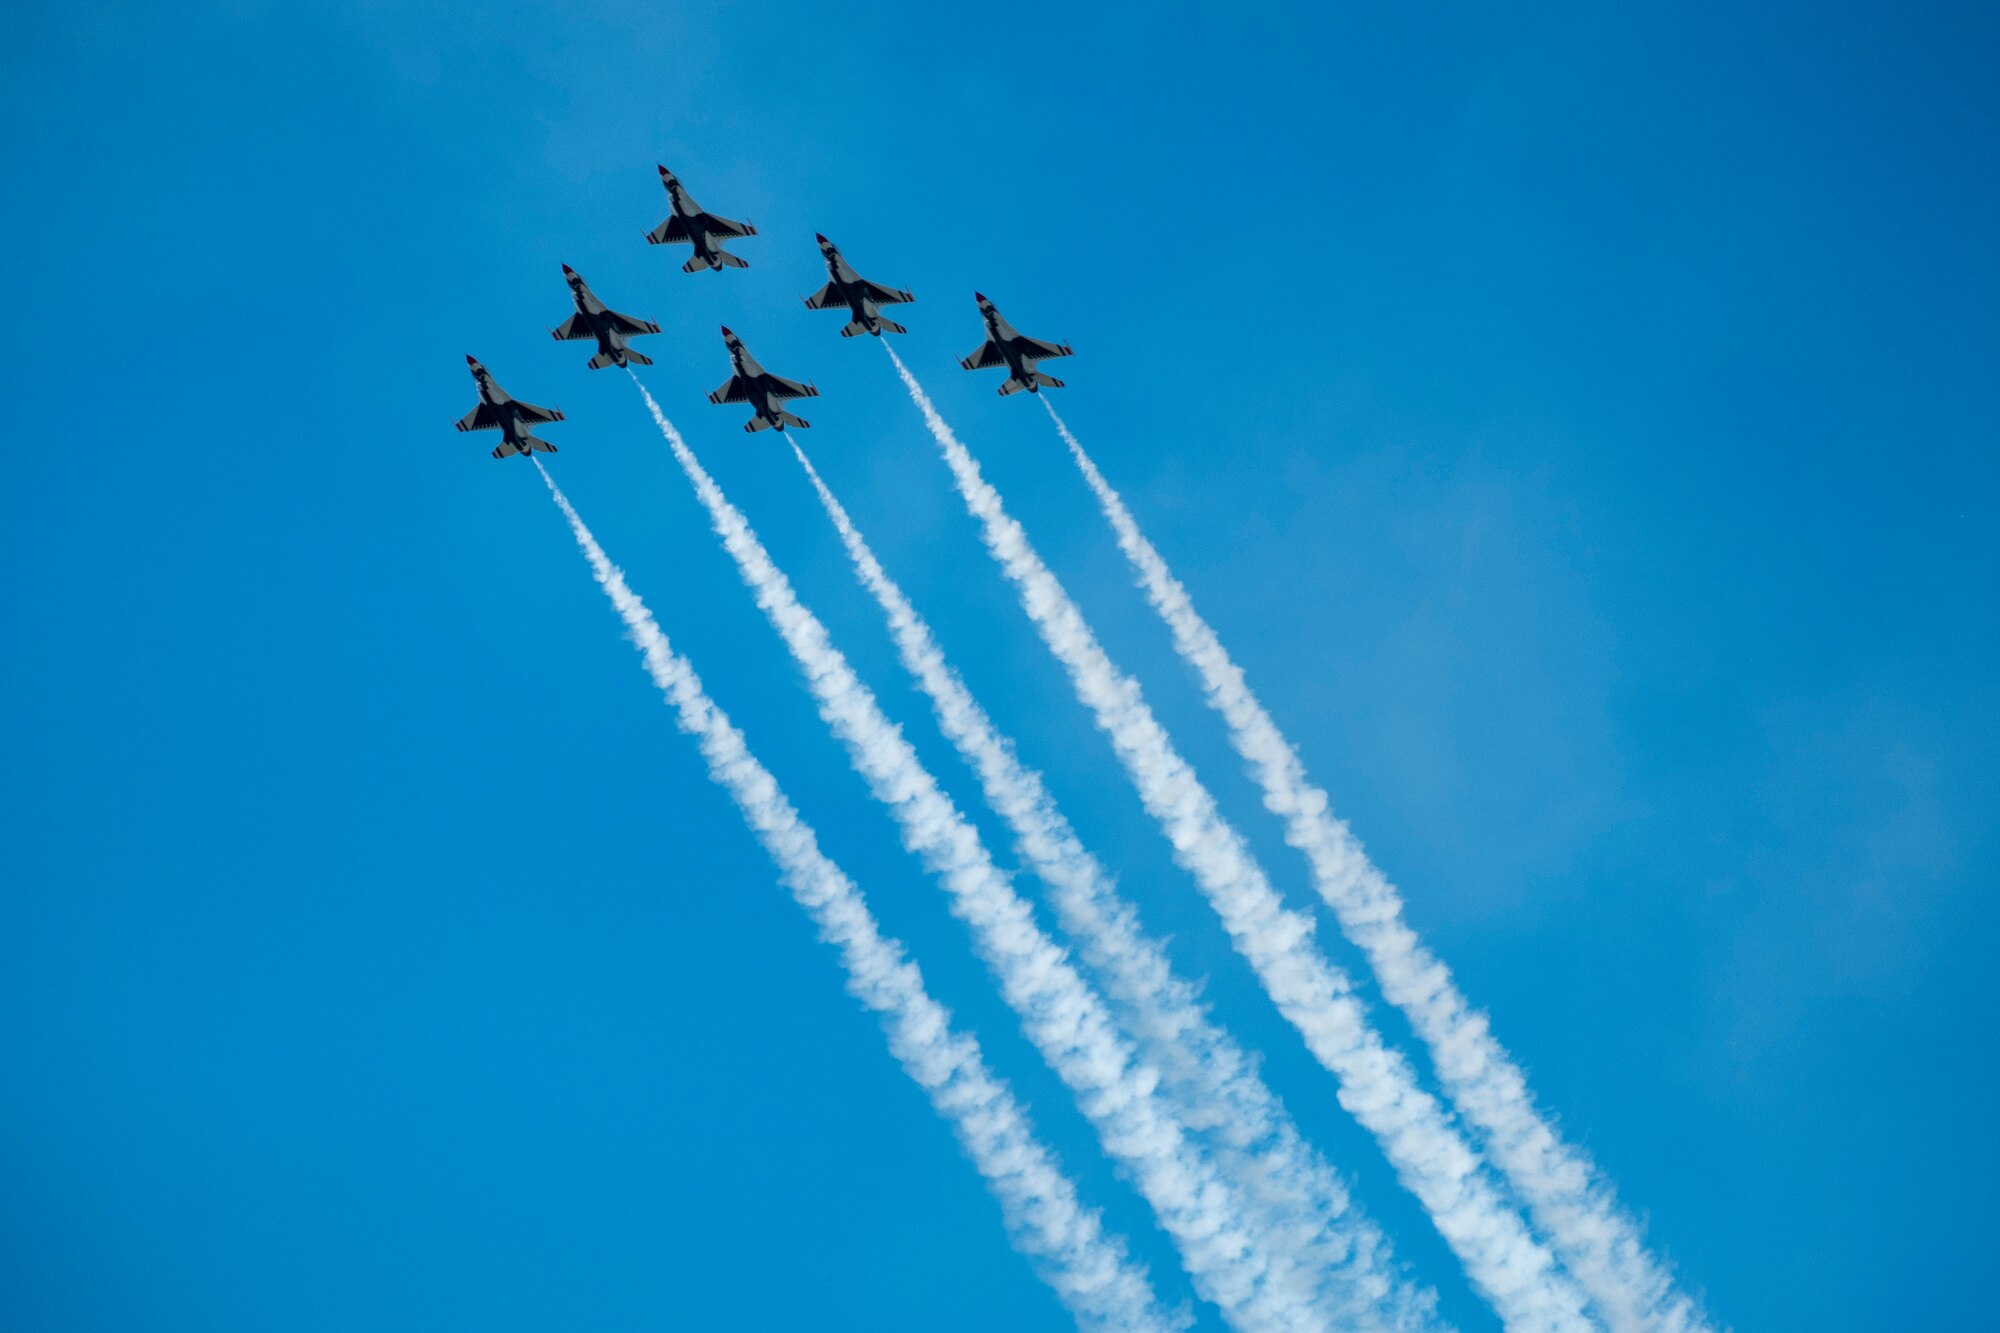 Members of the Thunderbirds Demonstration Squadron perform for Team McConnell  at the Frontiers in Flight Open House and Airshow Sept. 9, 2018, McConnell Air Force Base, Kan. In 1953 the Air Force activated the 3600th Demonstration Unit, which adopted the name “Thunderbirds,” establishing a 55-year heritage of displaying the capabilities of the most powerful Air Force in the world. (U.S. Air Force Photo by Staff Sgt. Preston Webb)